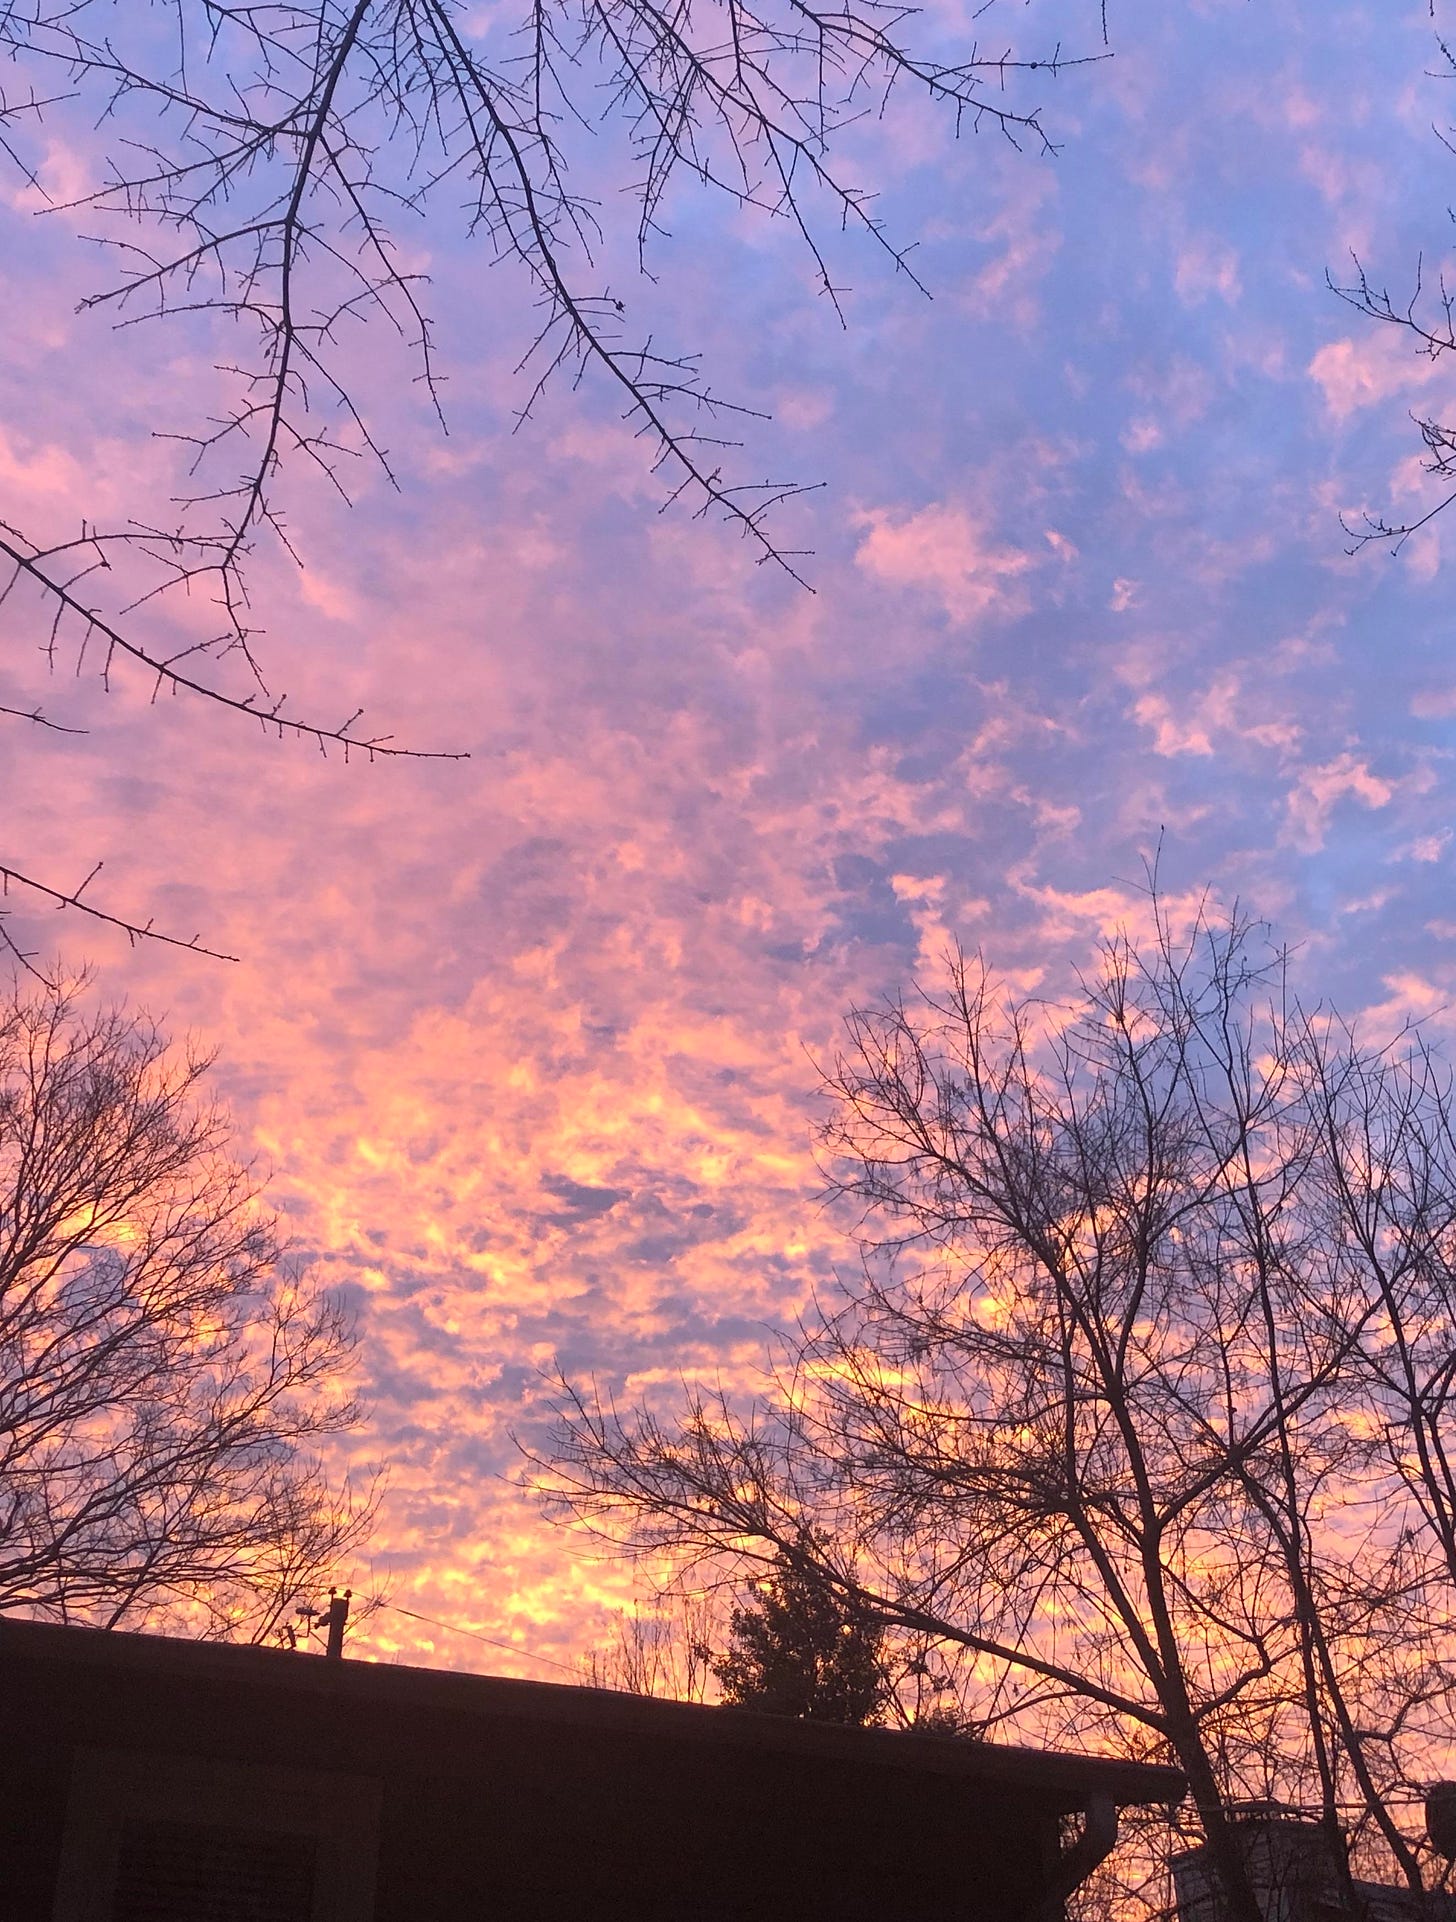 for once, it was actually beautiful outside : r/aesthetic